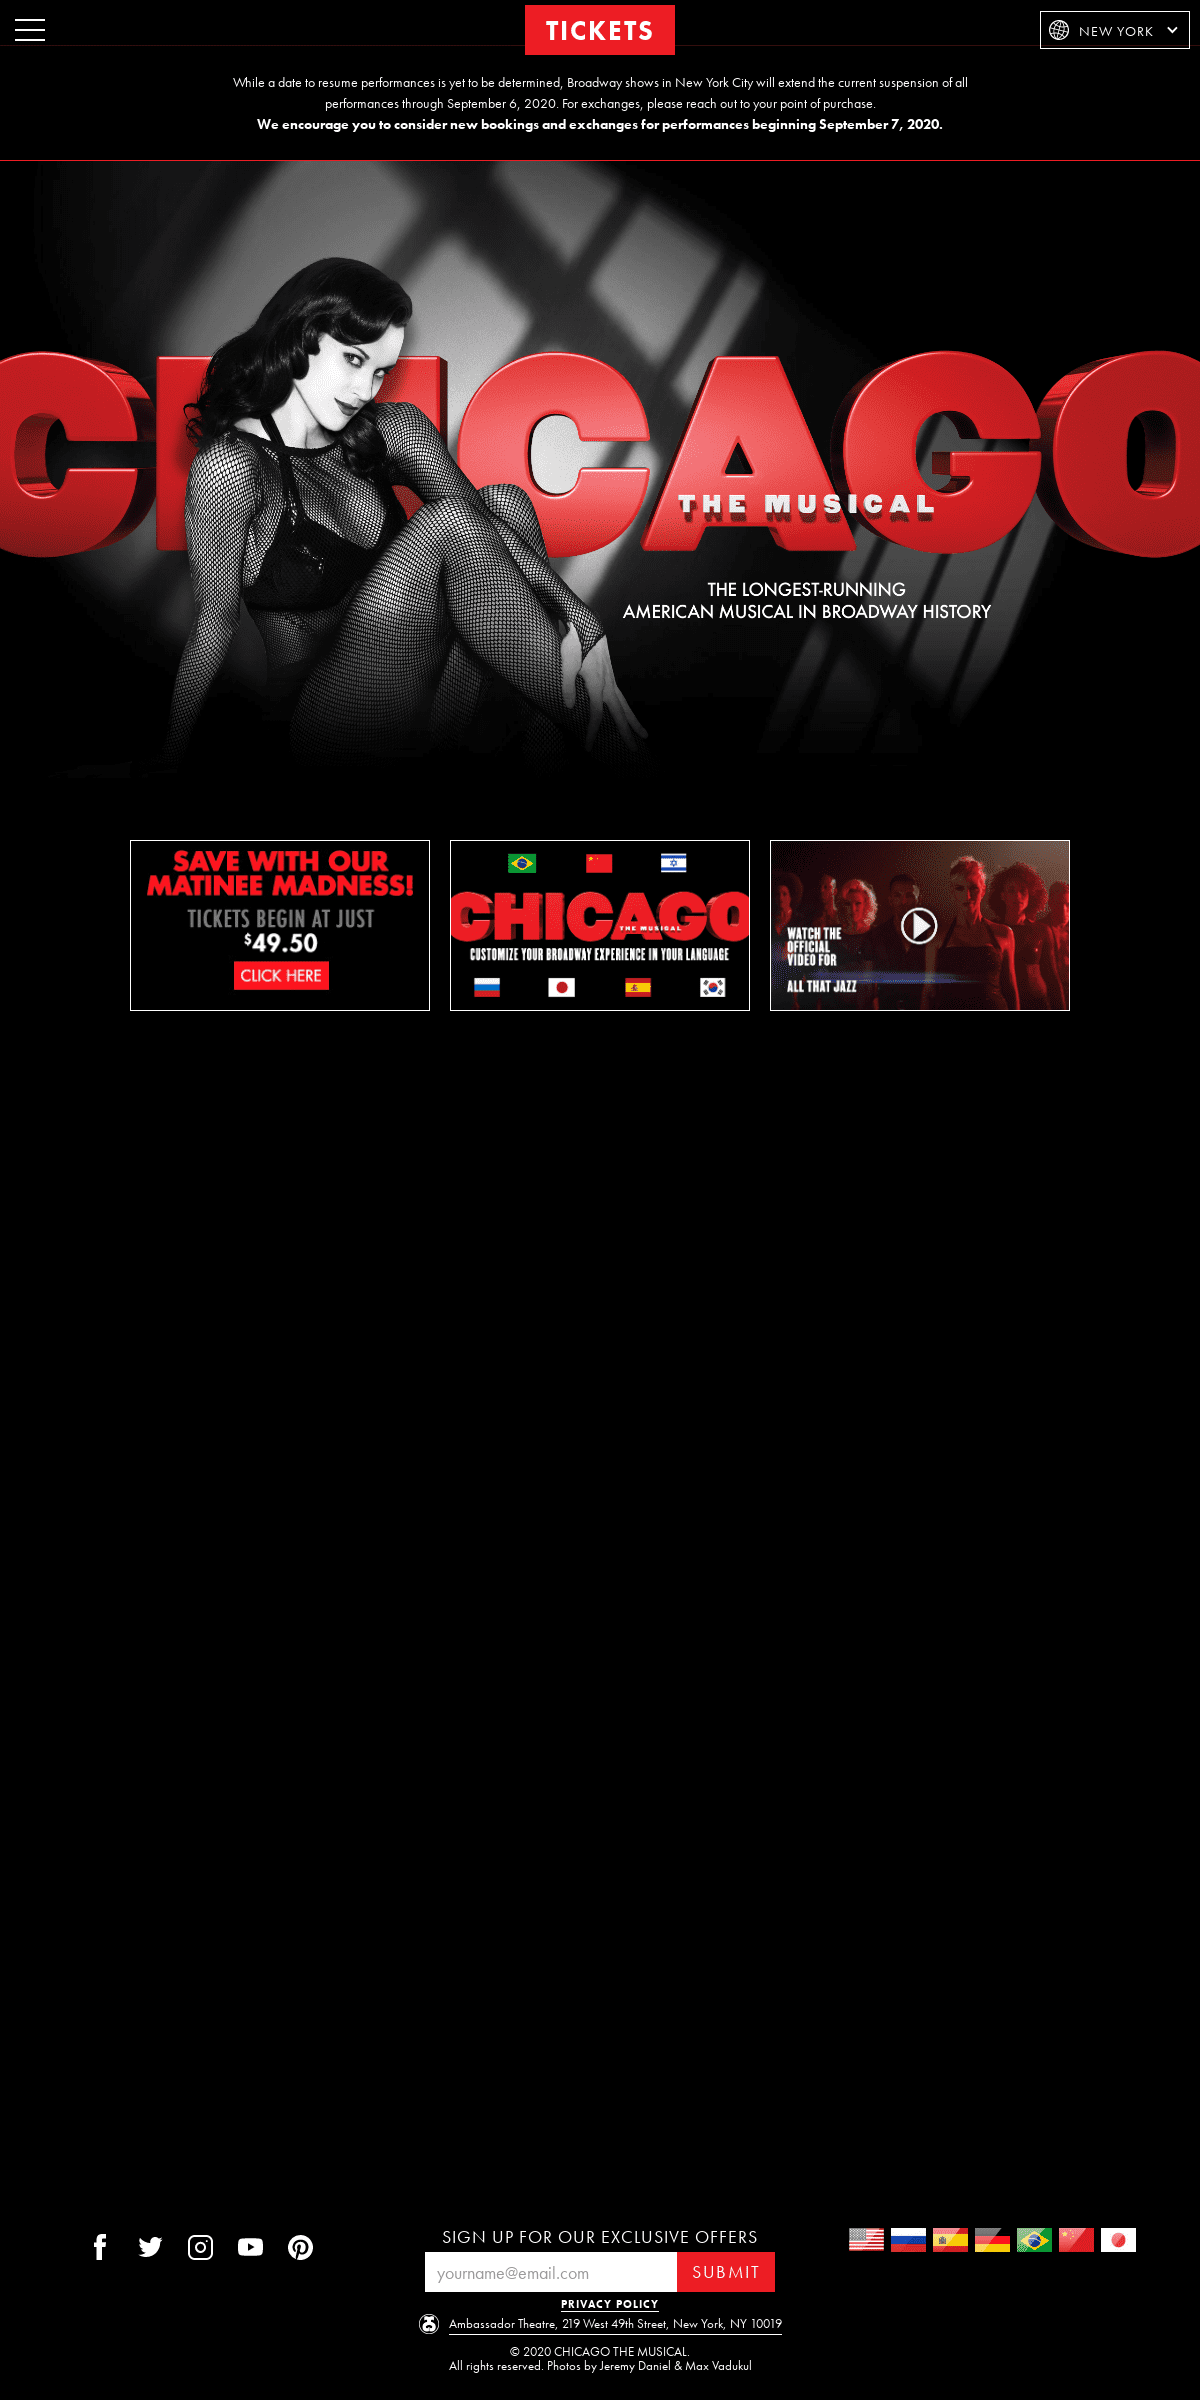 A complete backup of chicagothemusical.com